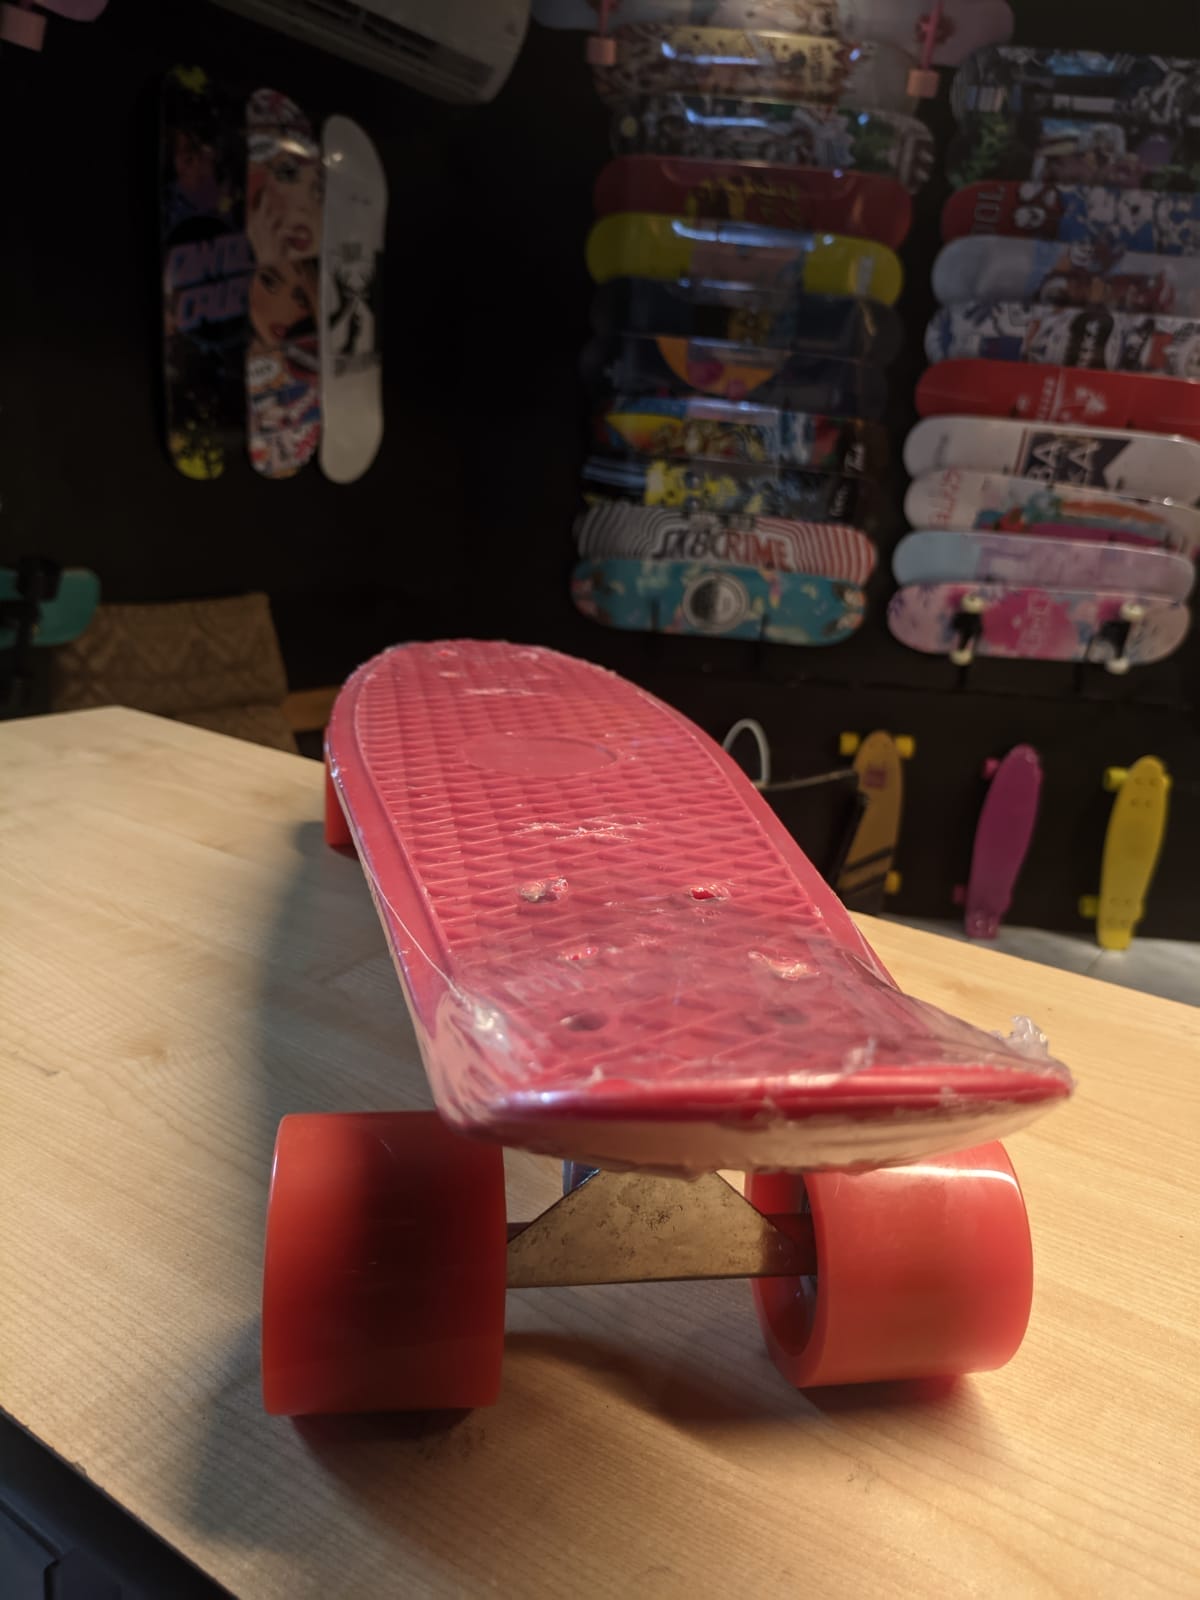 Australian company Penny Skateboards first started making smaller plastic boards.